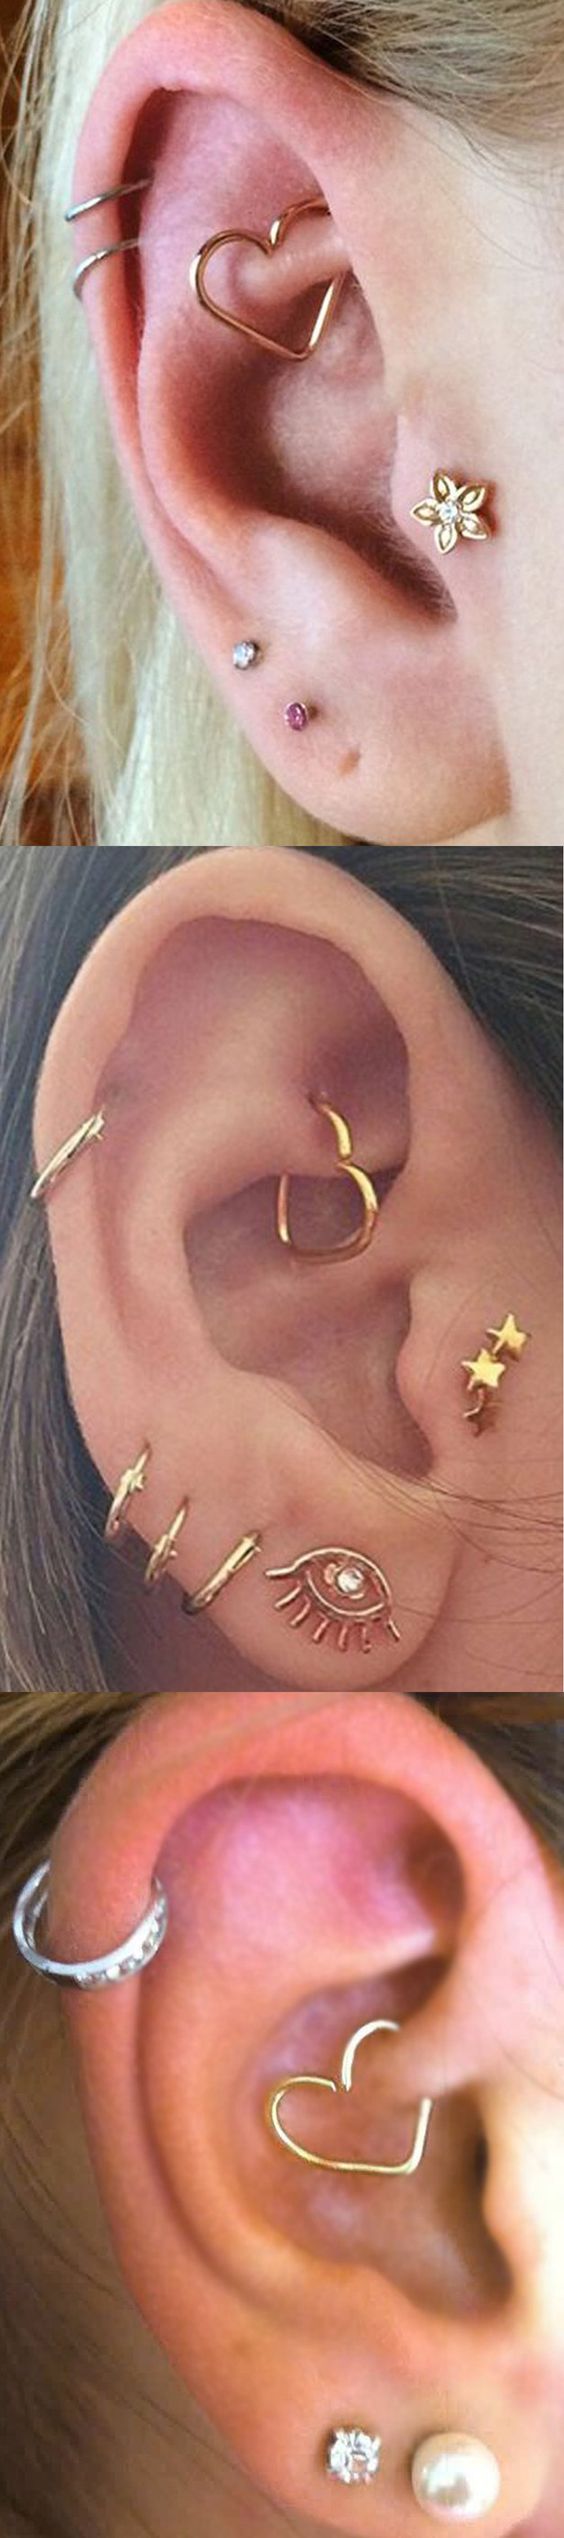 Delicate Ear Piercing Ideas at MyBodiArt.com - Gold Rook Piercing Jewelry - Tagus Star Flower Stud - Cartilage Ring Hoop